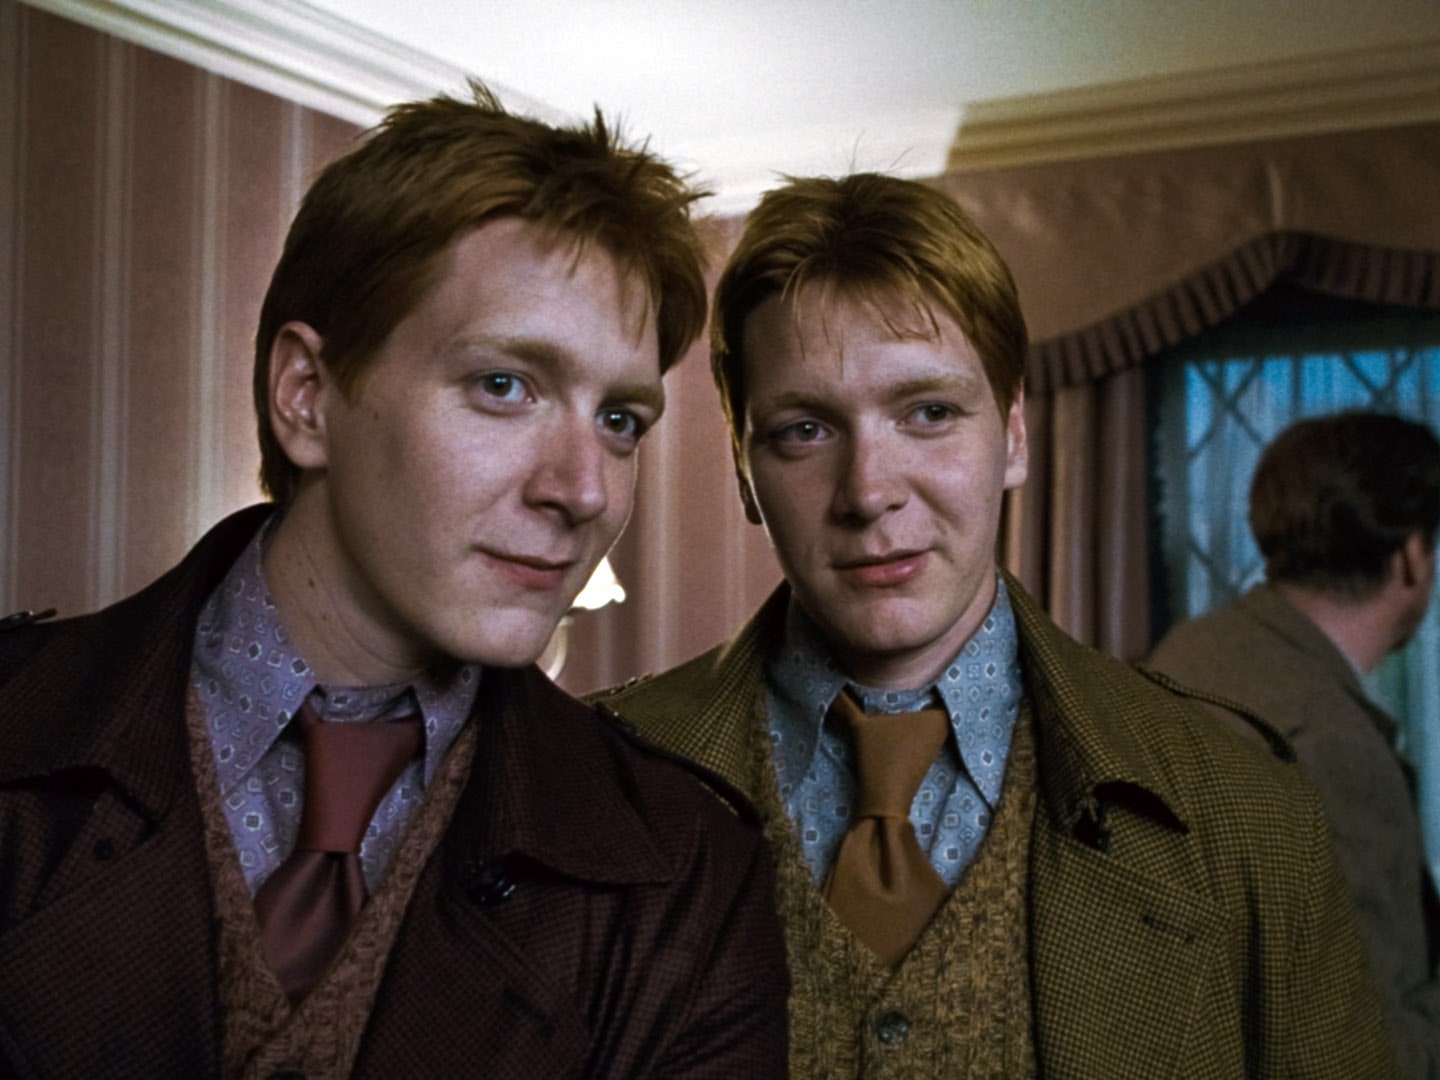 Who Portrayed Fred And George Weasley In The Harry Potter Films?